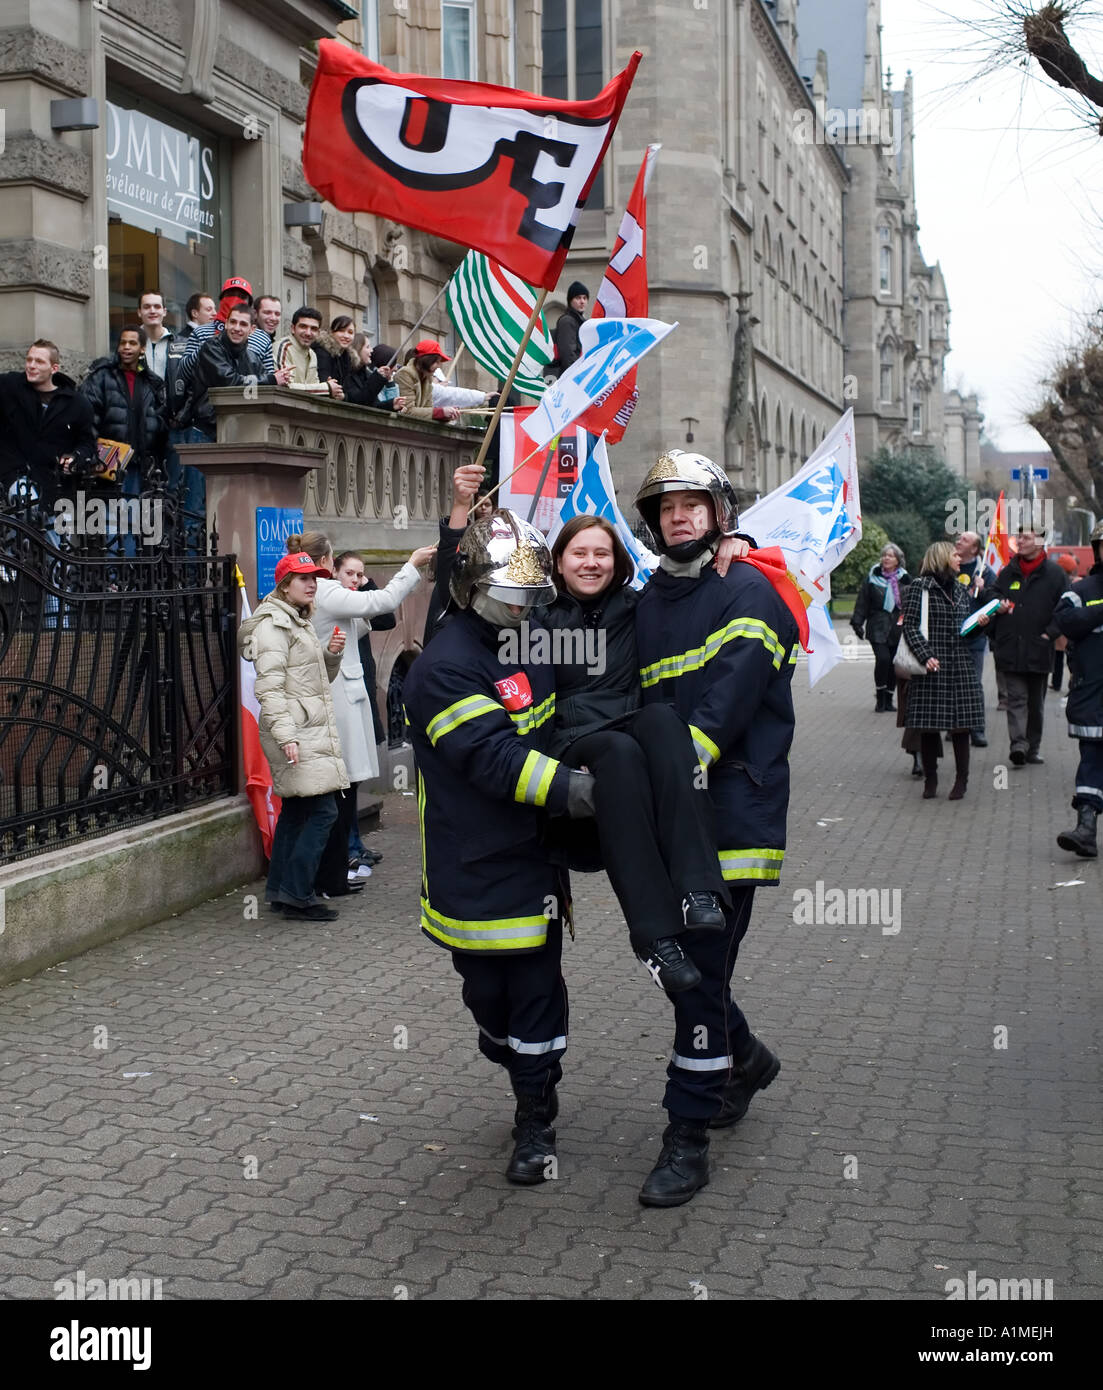 April 14 2006, 2 firemen carrying a protester girl holding a FO flag, protest march against Bolkestein directive, Strasbourg, Alsace, France, Europe Stock Photo